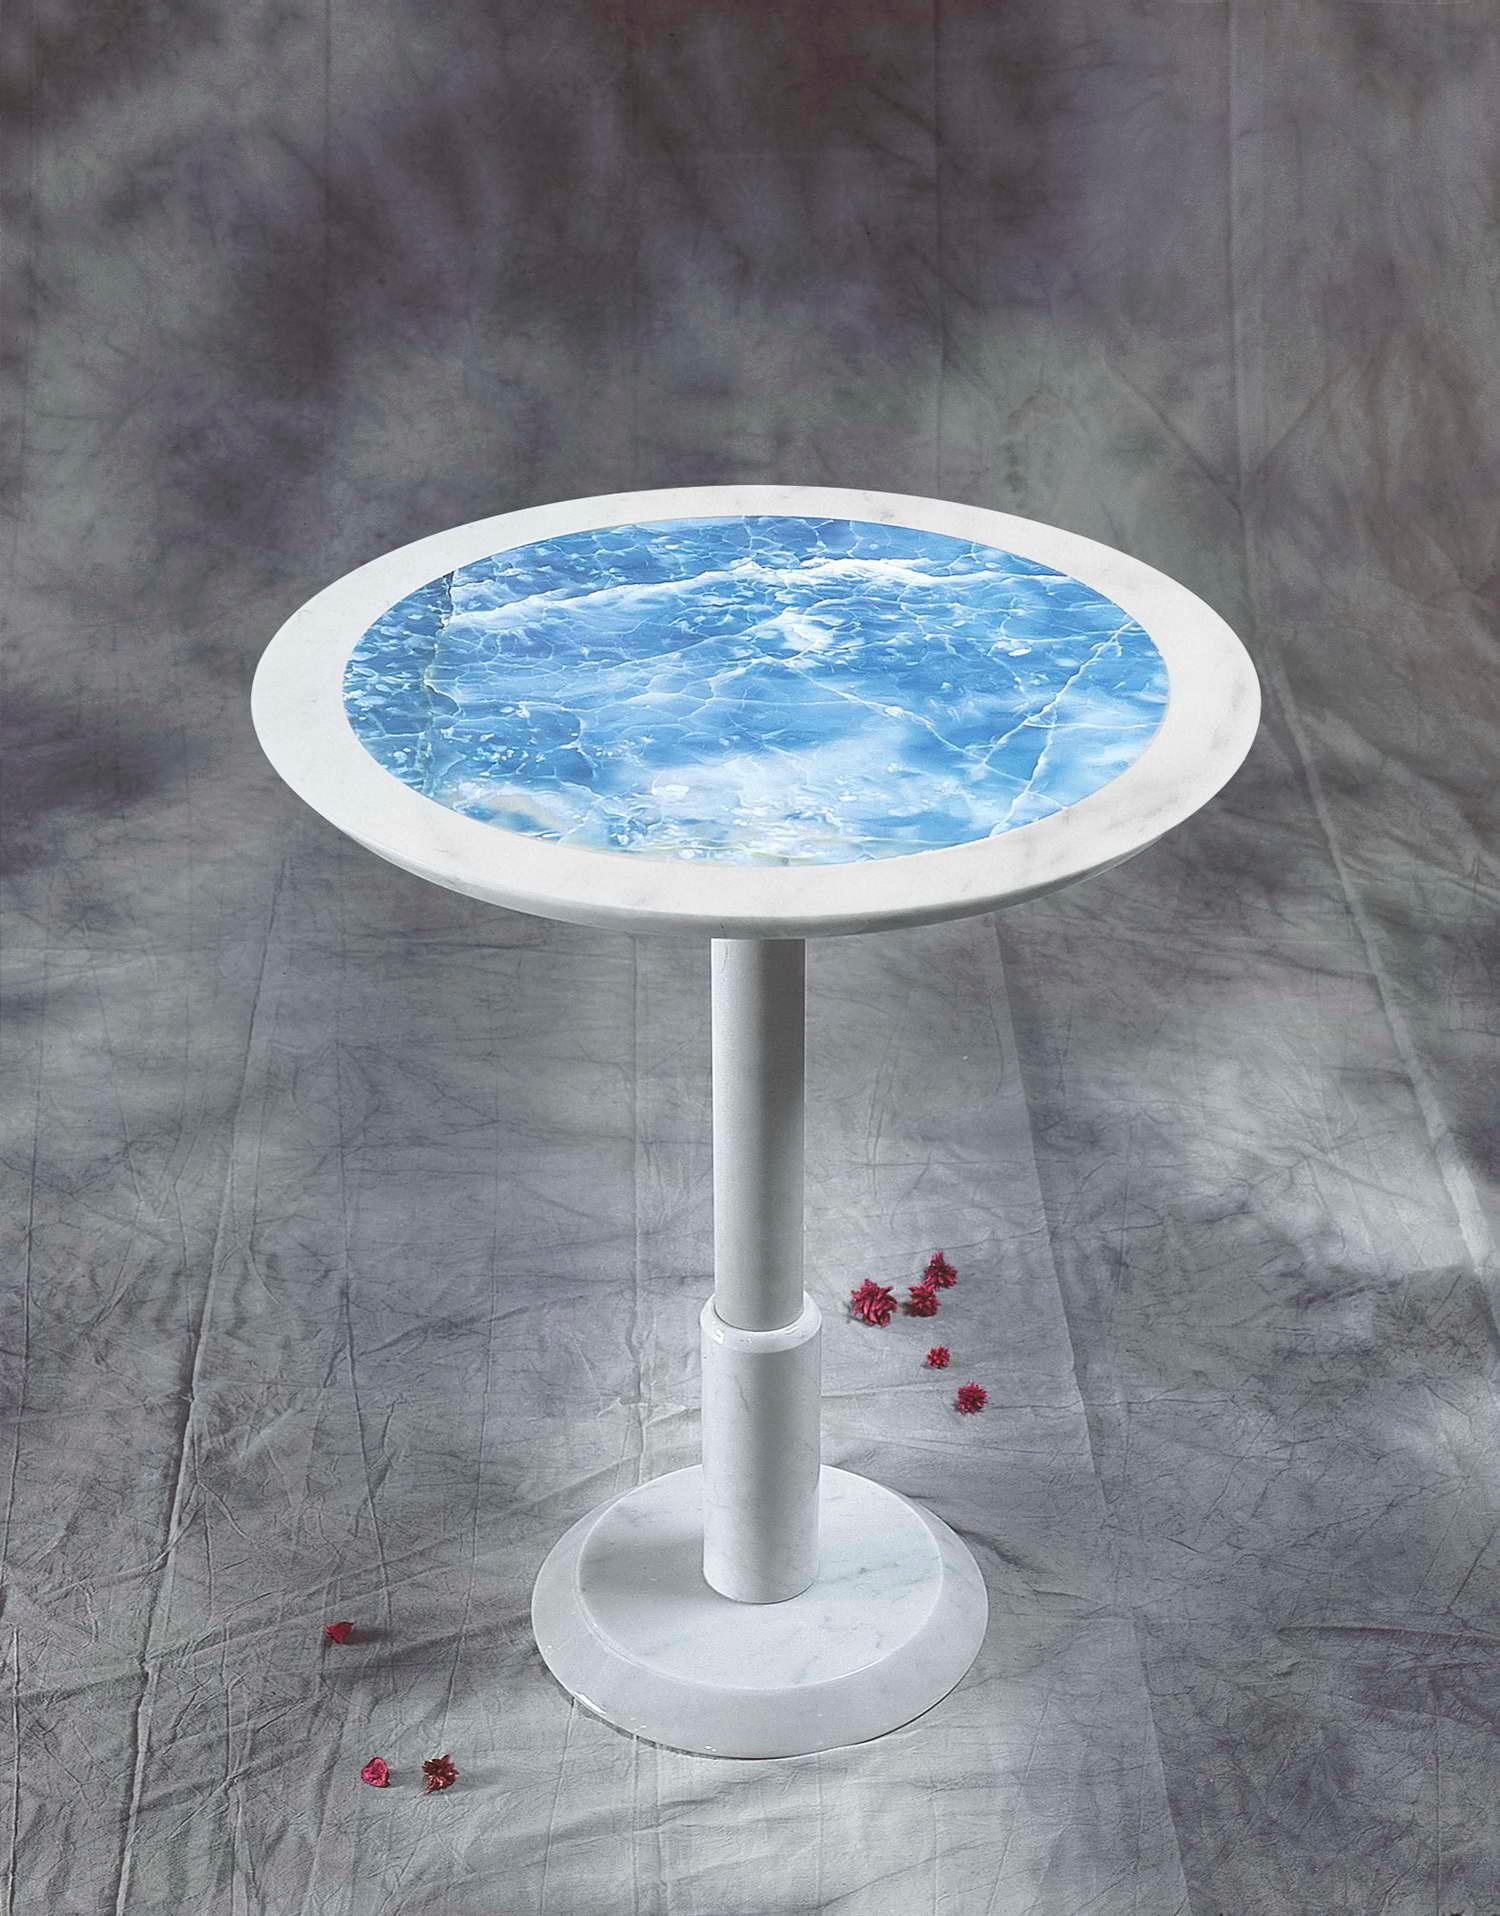 Name: BISTROT
Marble Table designed by architect Marco Piva
Materials: White P. + Blu Onix + Painted steel
Size: Diameter Cm 65 x Height 75
Designed by: Marco Piva.

 